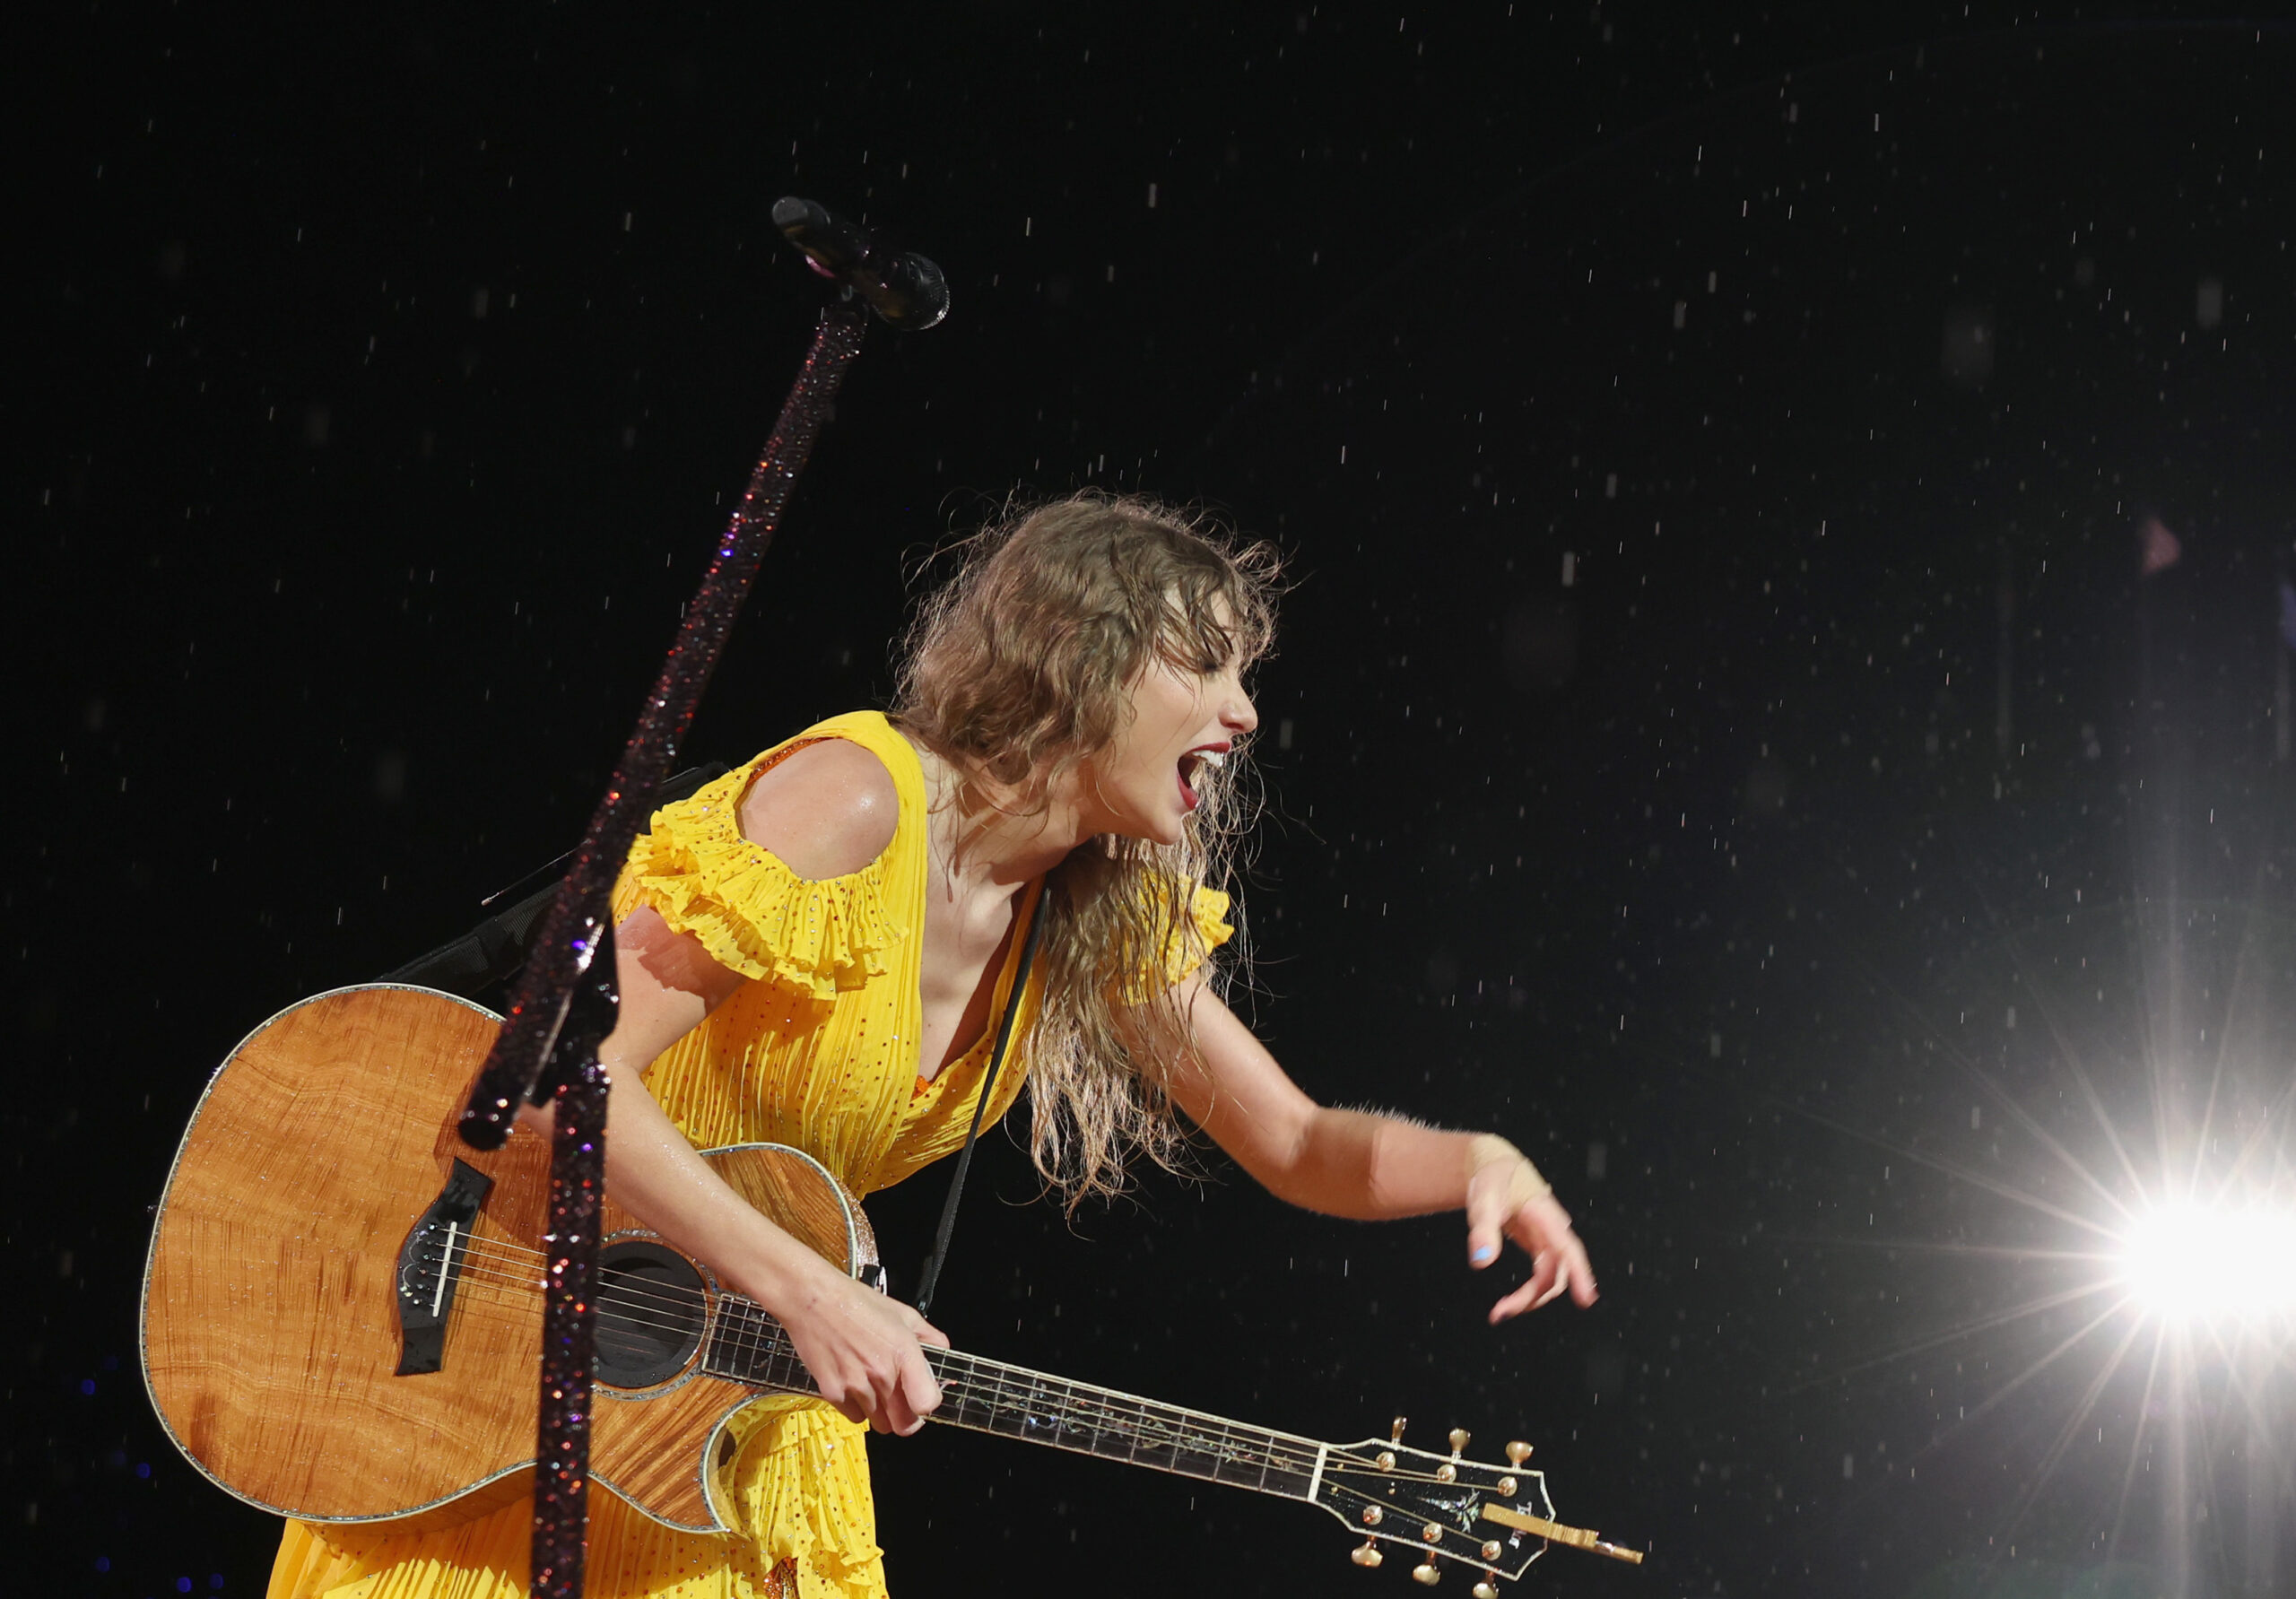 Taylor Swift performs in Nashville despite storm delay, braving pouring rain.